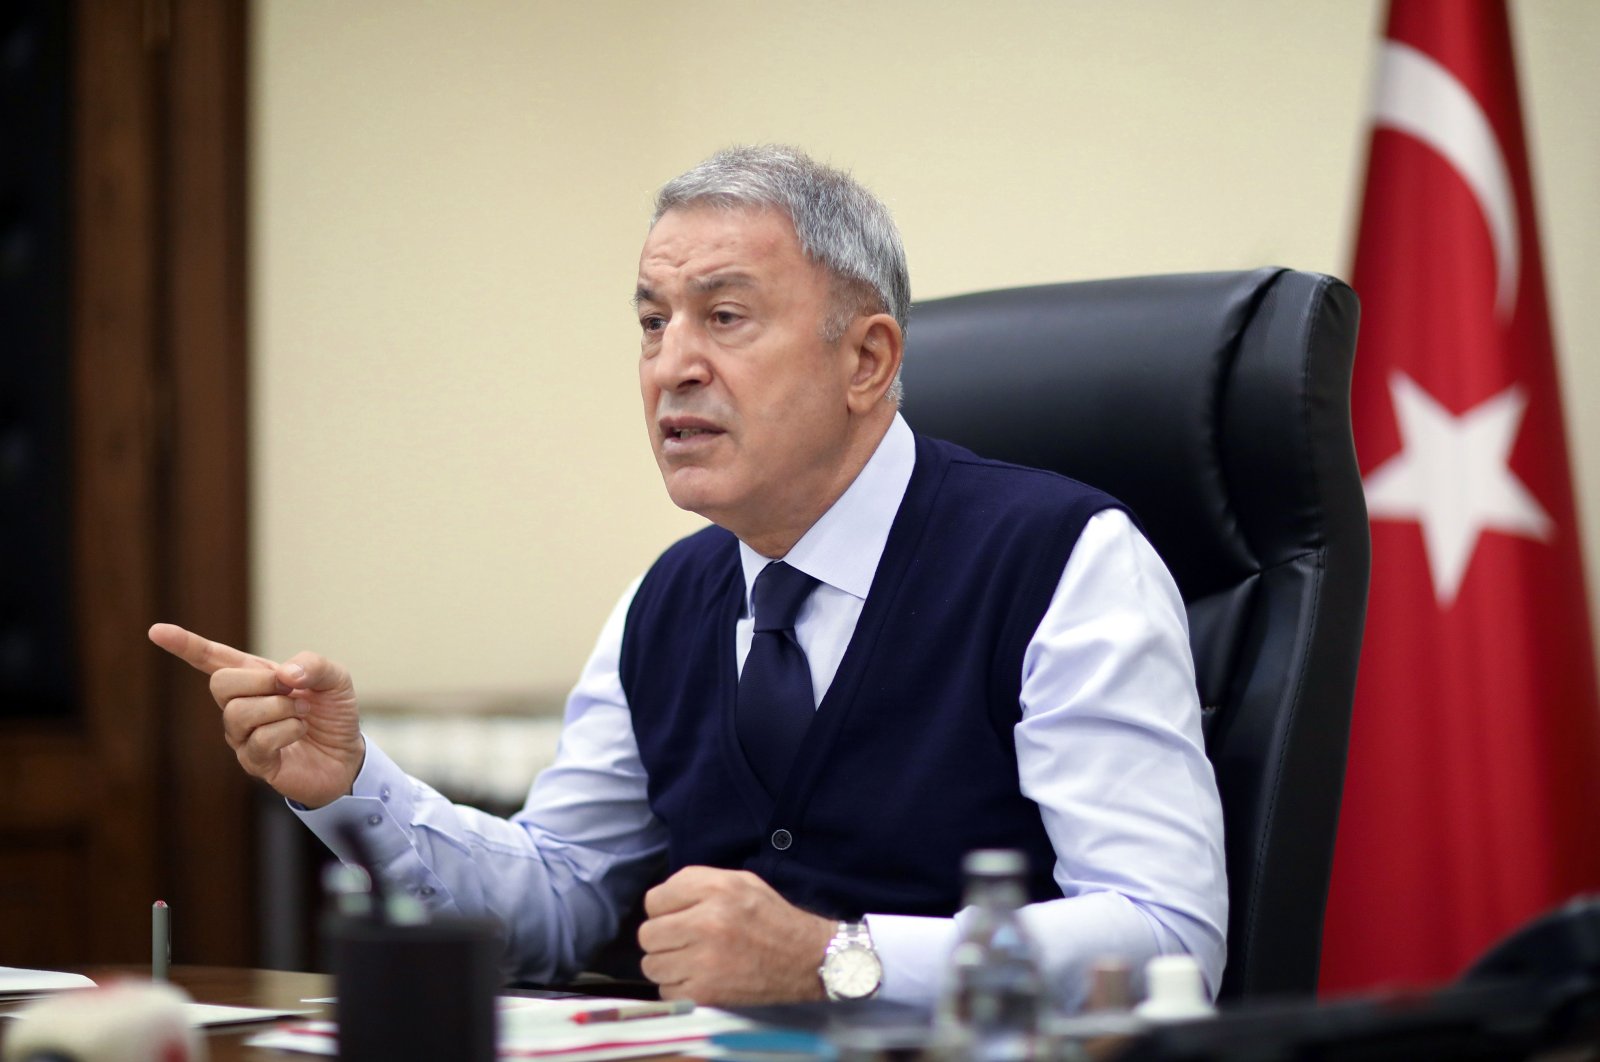 National Defense Minister Hulusi Akar speaks as he chairs a teleconference call meeting in the capital Ankara, Oct. 5, 2020. (AFP)